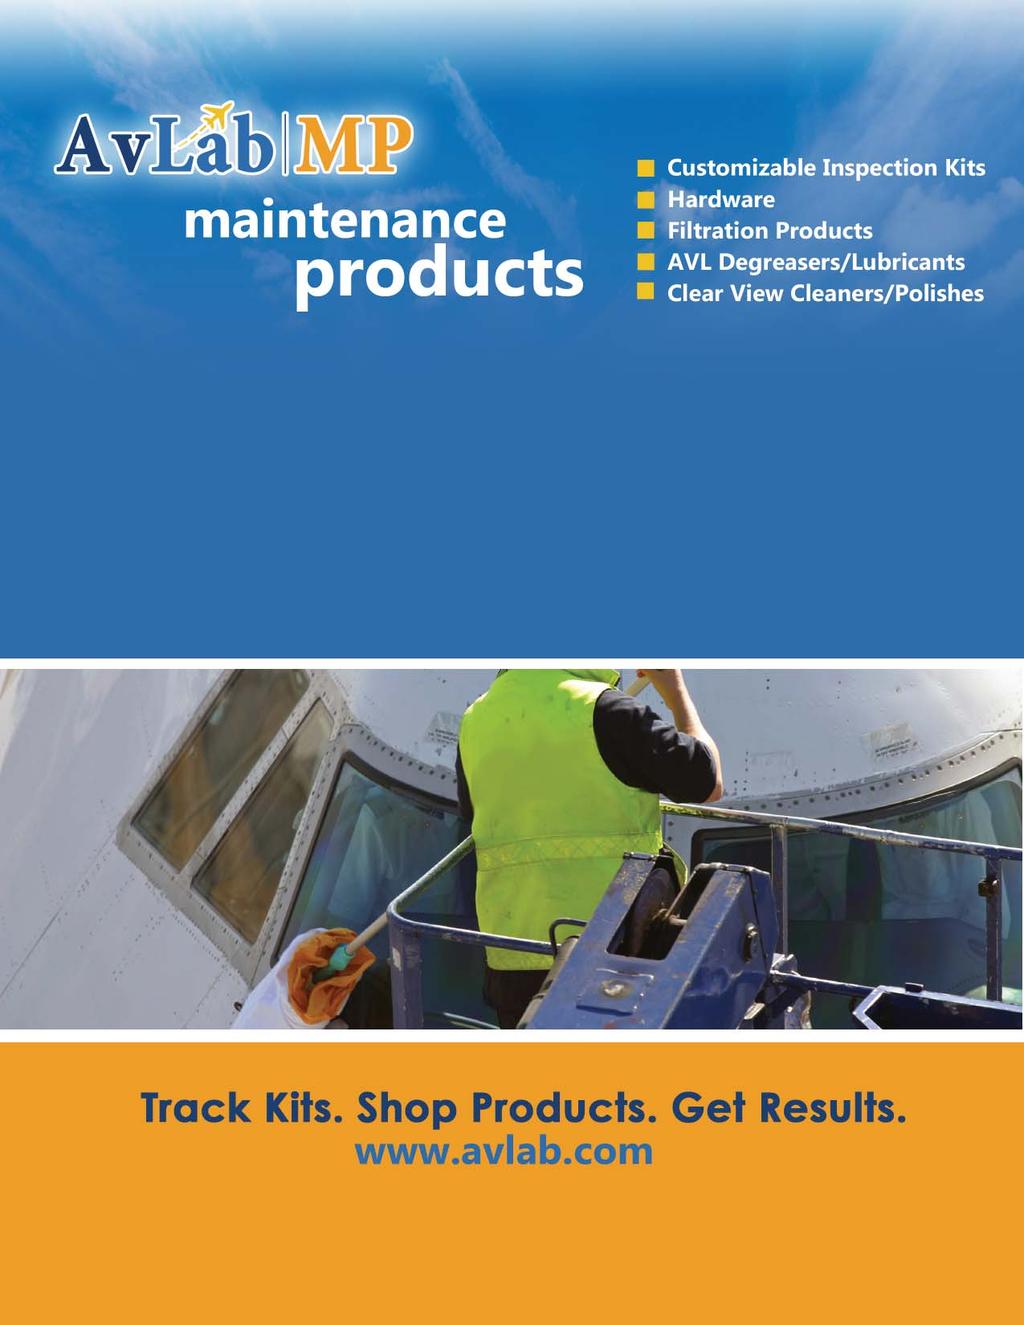 Aviation Laboratories MP Product Group offers aviation maintenance products for General Aviation maintenance professionals and facilities.